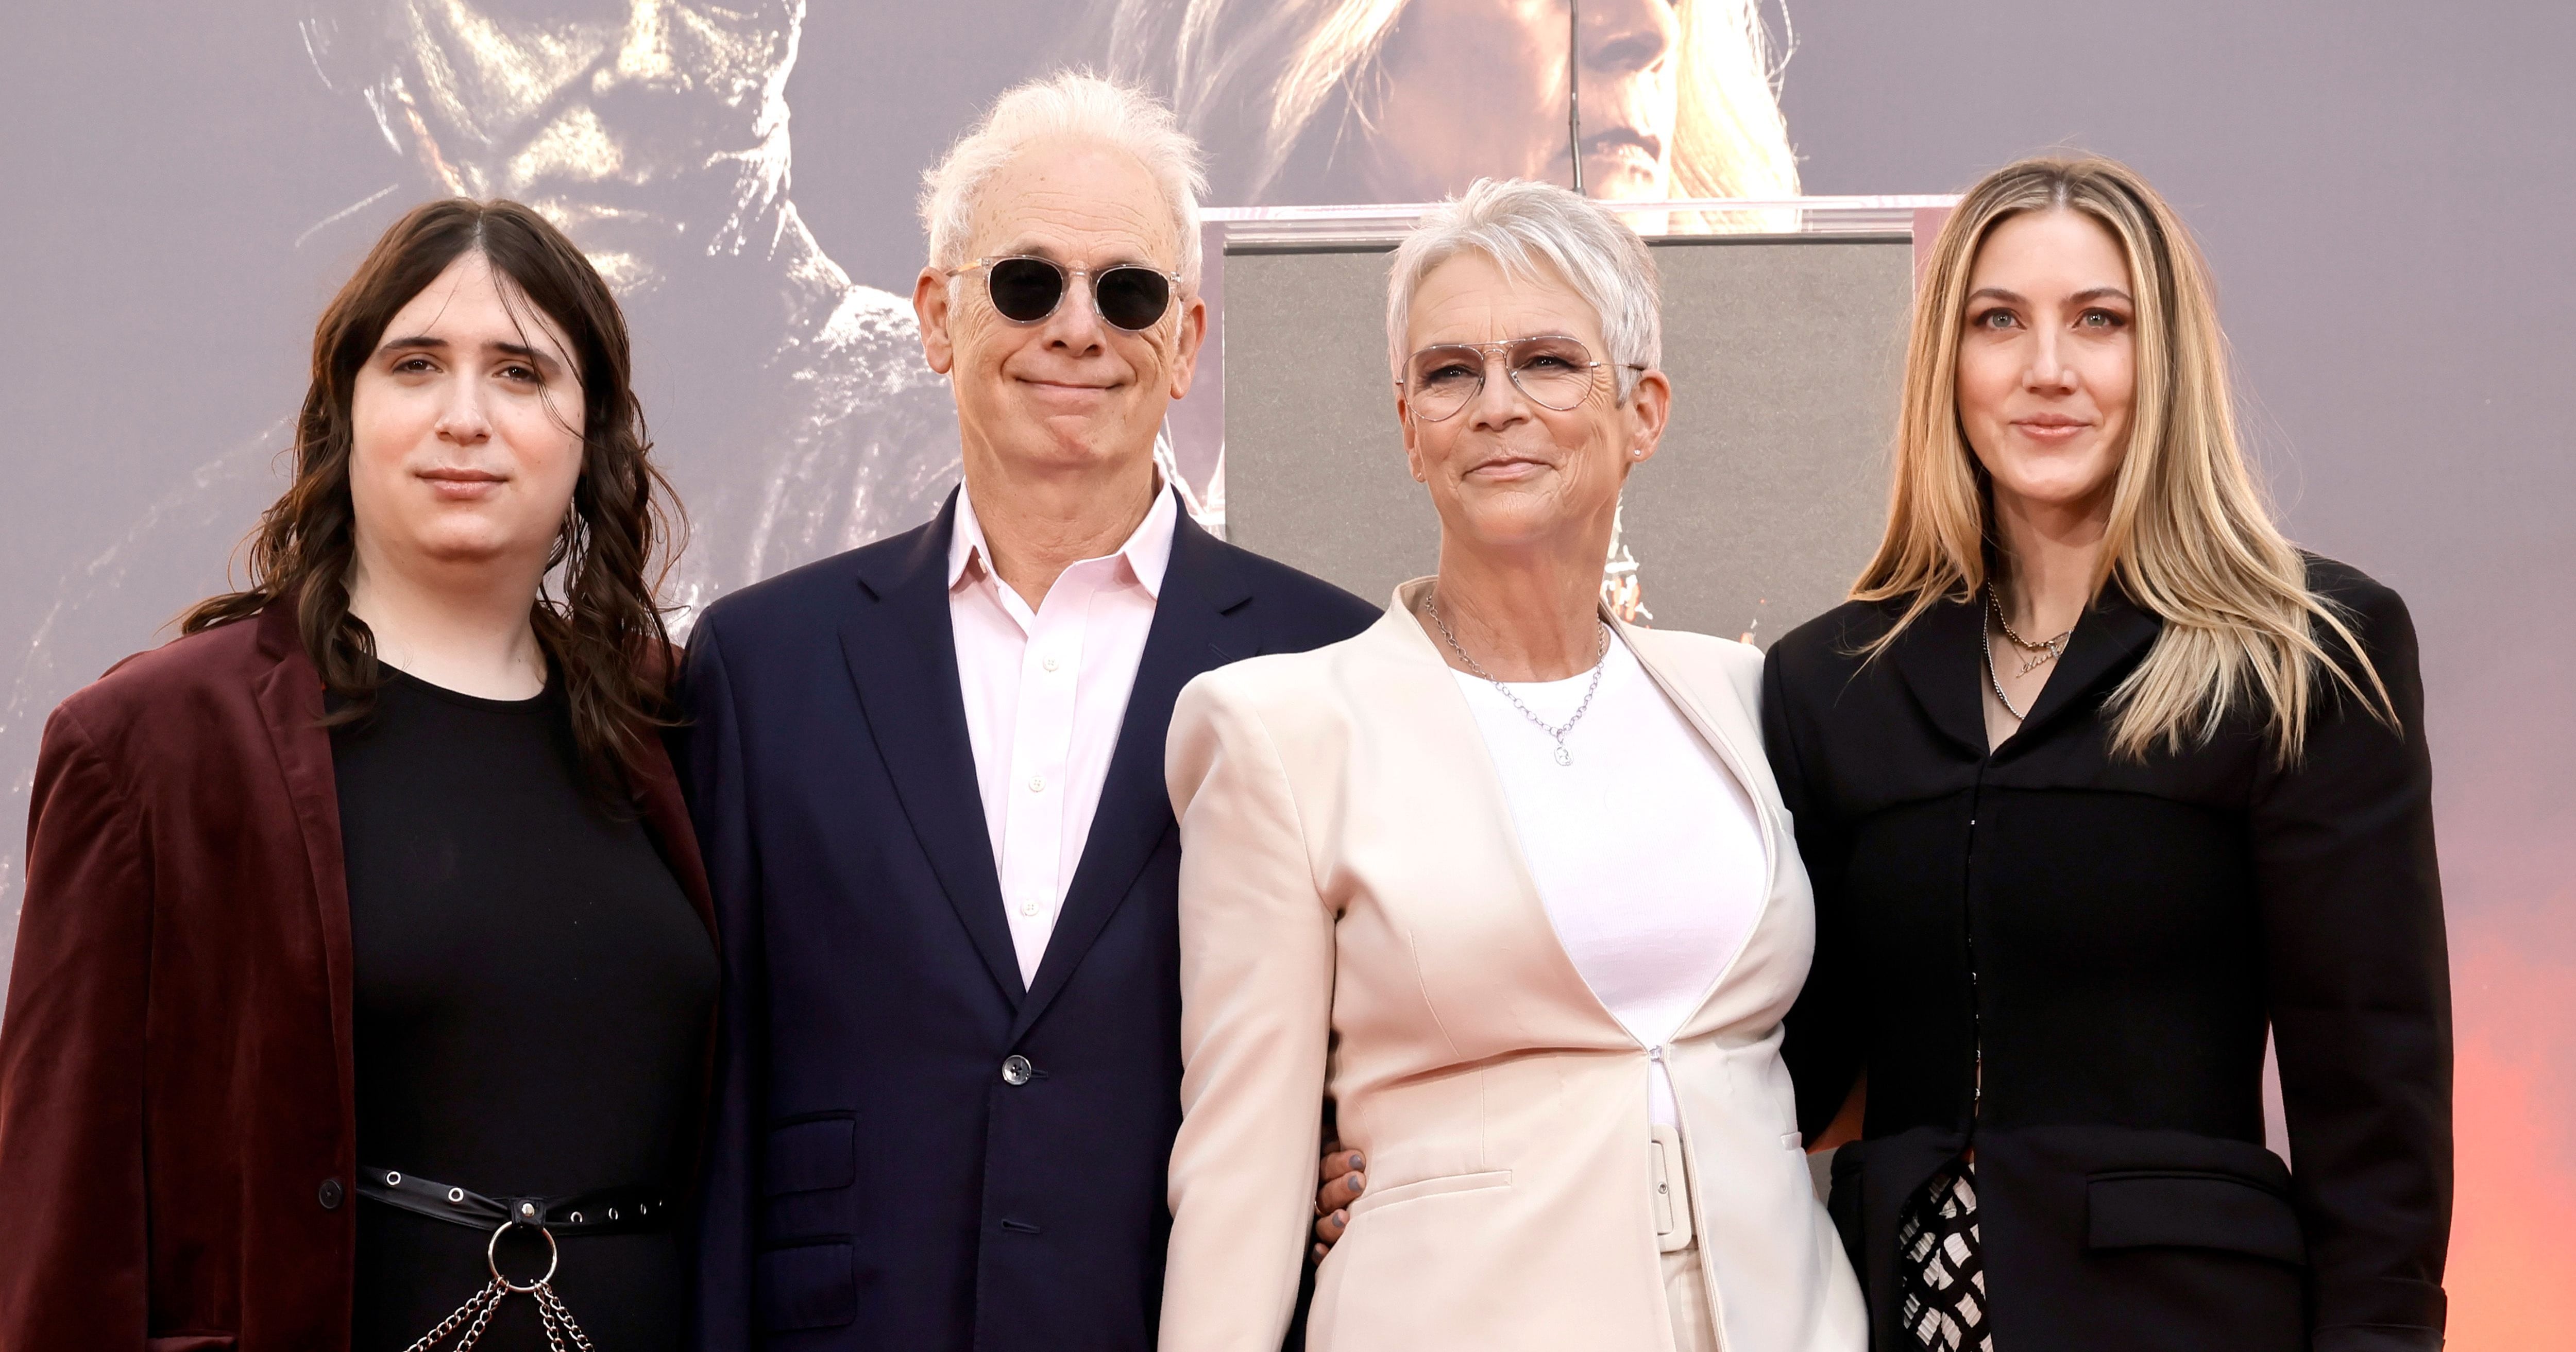 Jamie Lee Curtis Reflects on Learning From Her Trans Daughter: “I’m a Student”